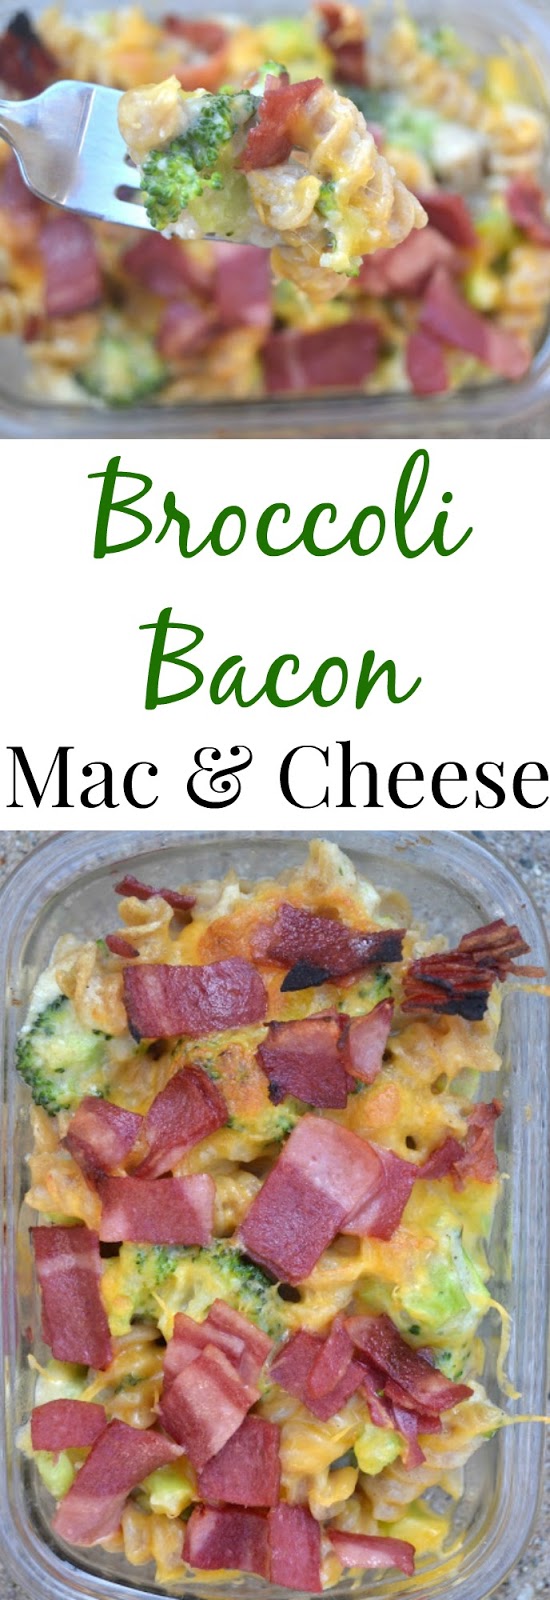 Broccoli Bacon Mac and Cheese- made lighter with a creamy cauliflower sauce and turkey bacon. www.nutritionistreviews.com